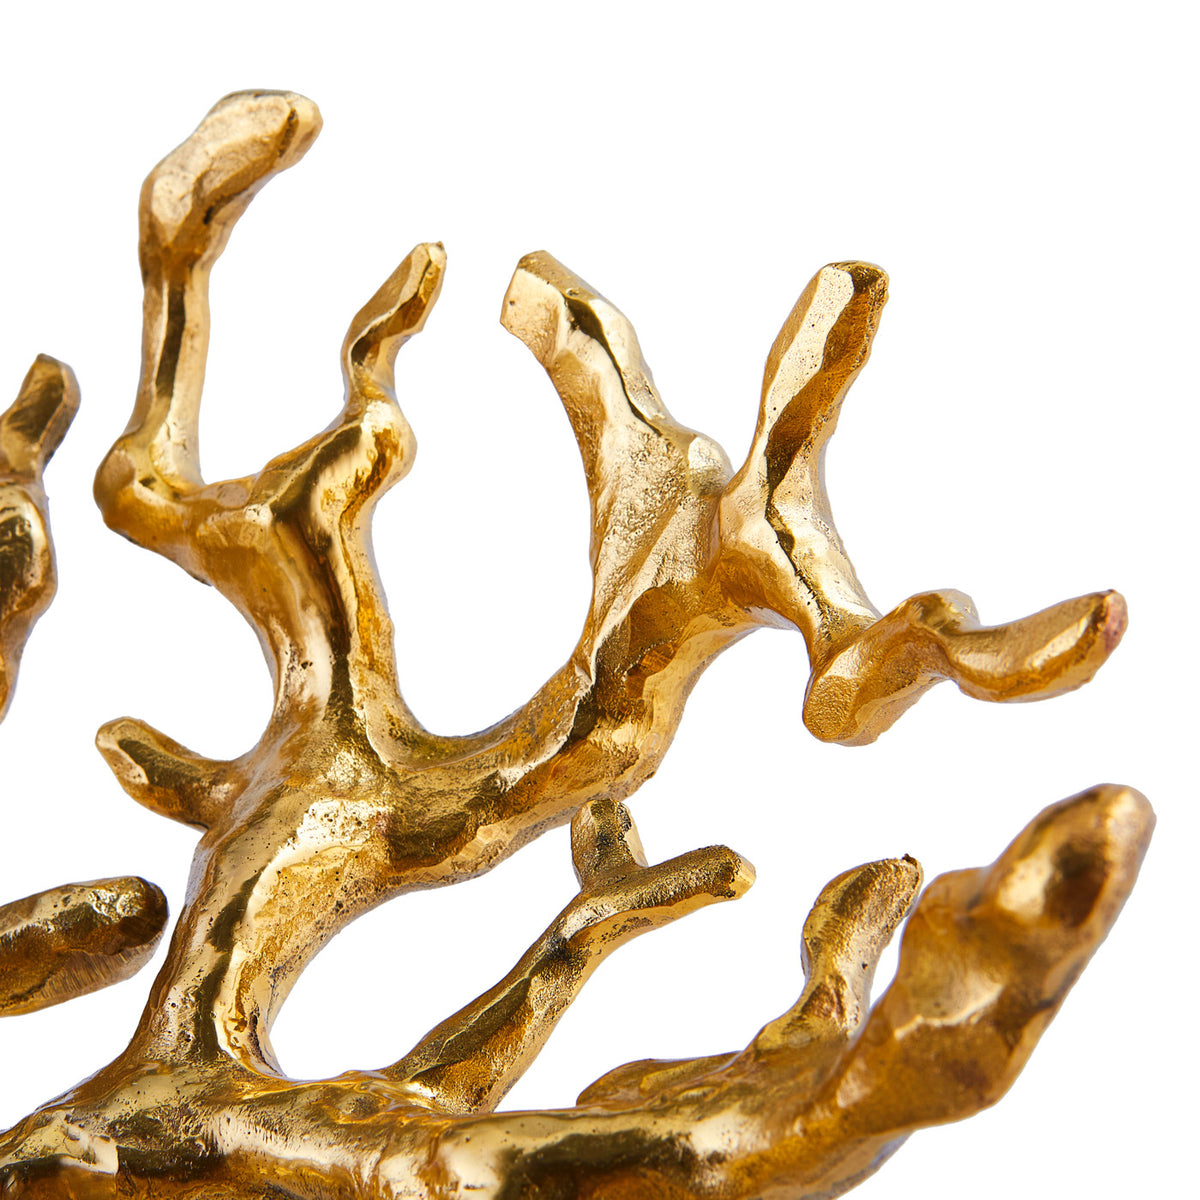 Brass Coral Bowl by Jonathan Adler